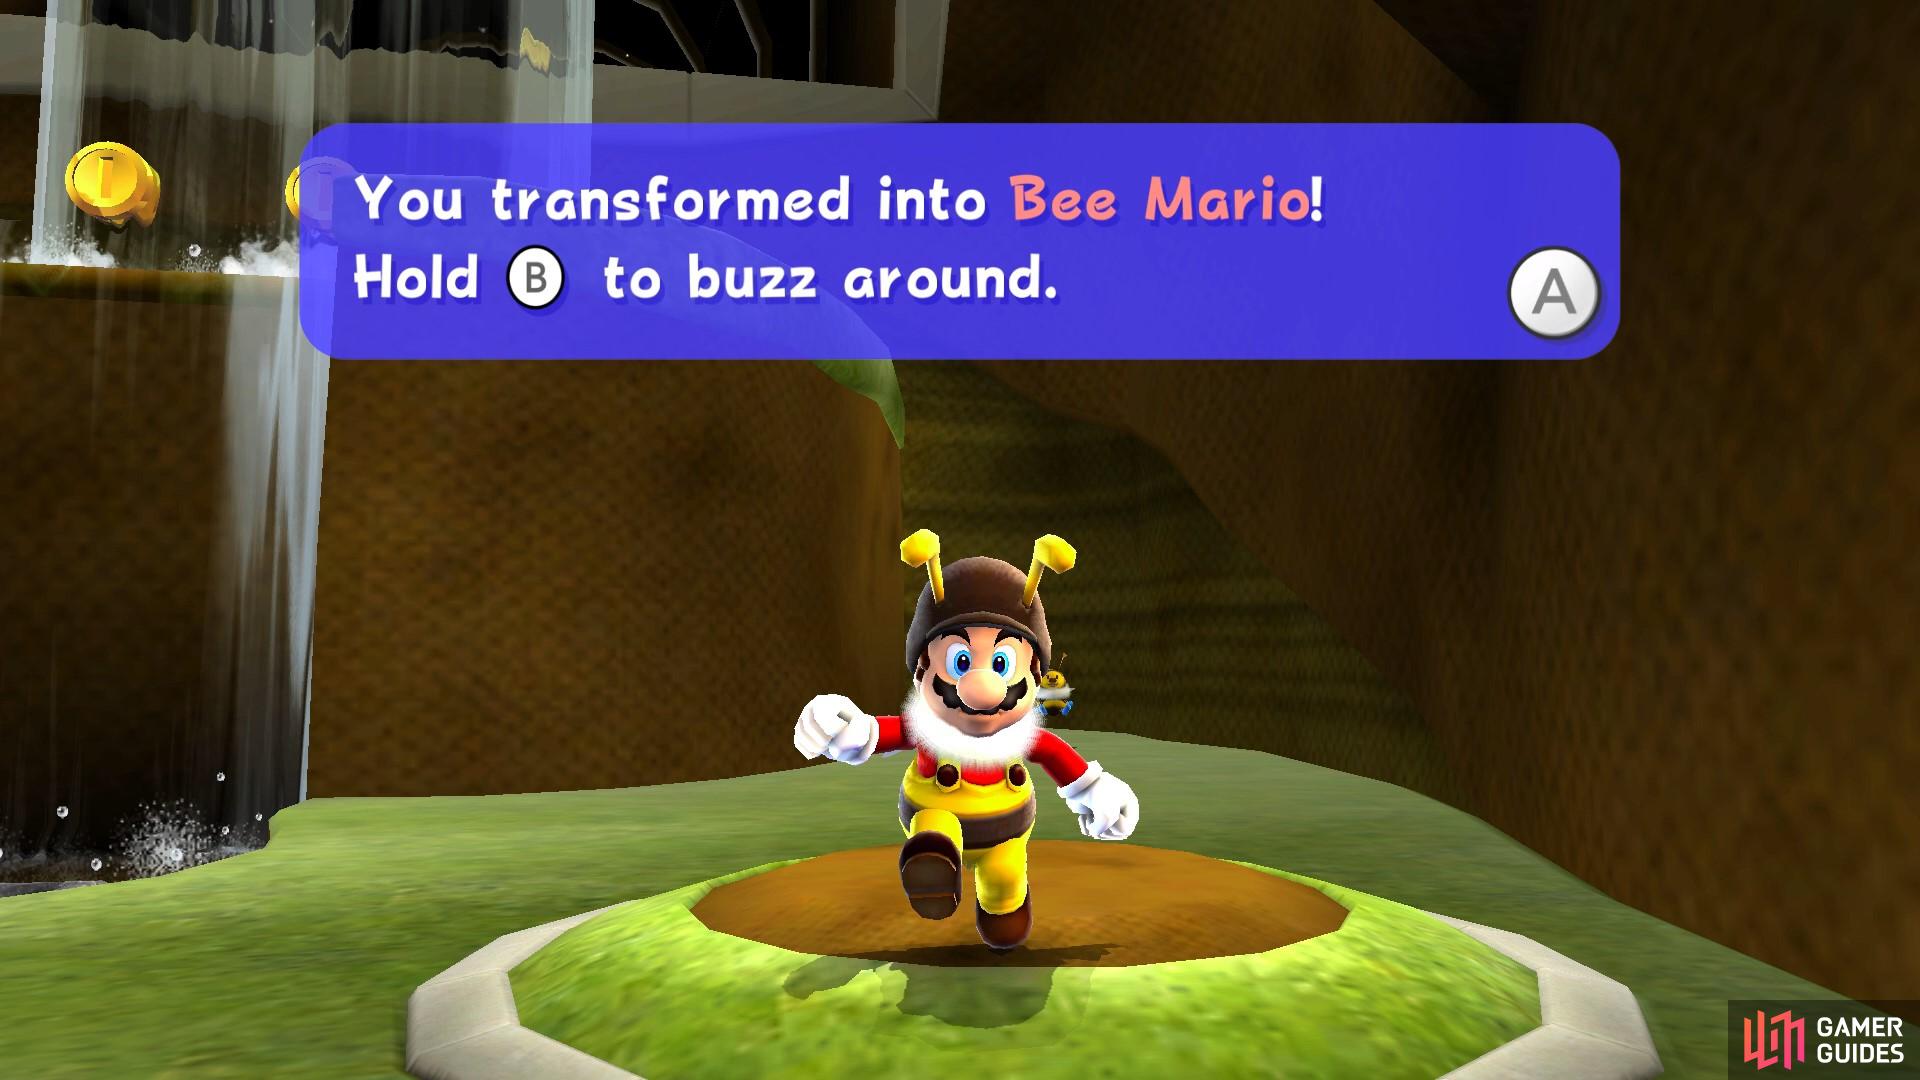 With Bee Mario, you’ll be able to fly around!